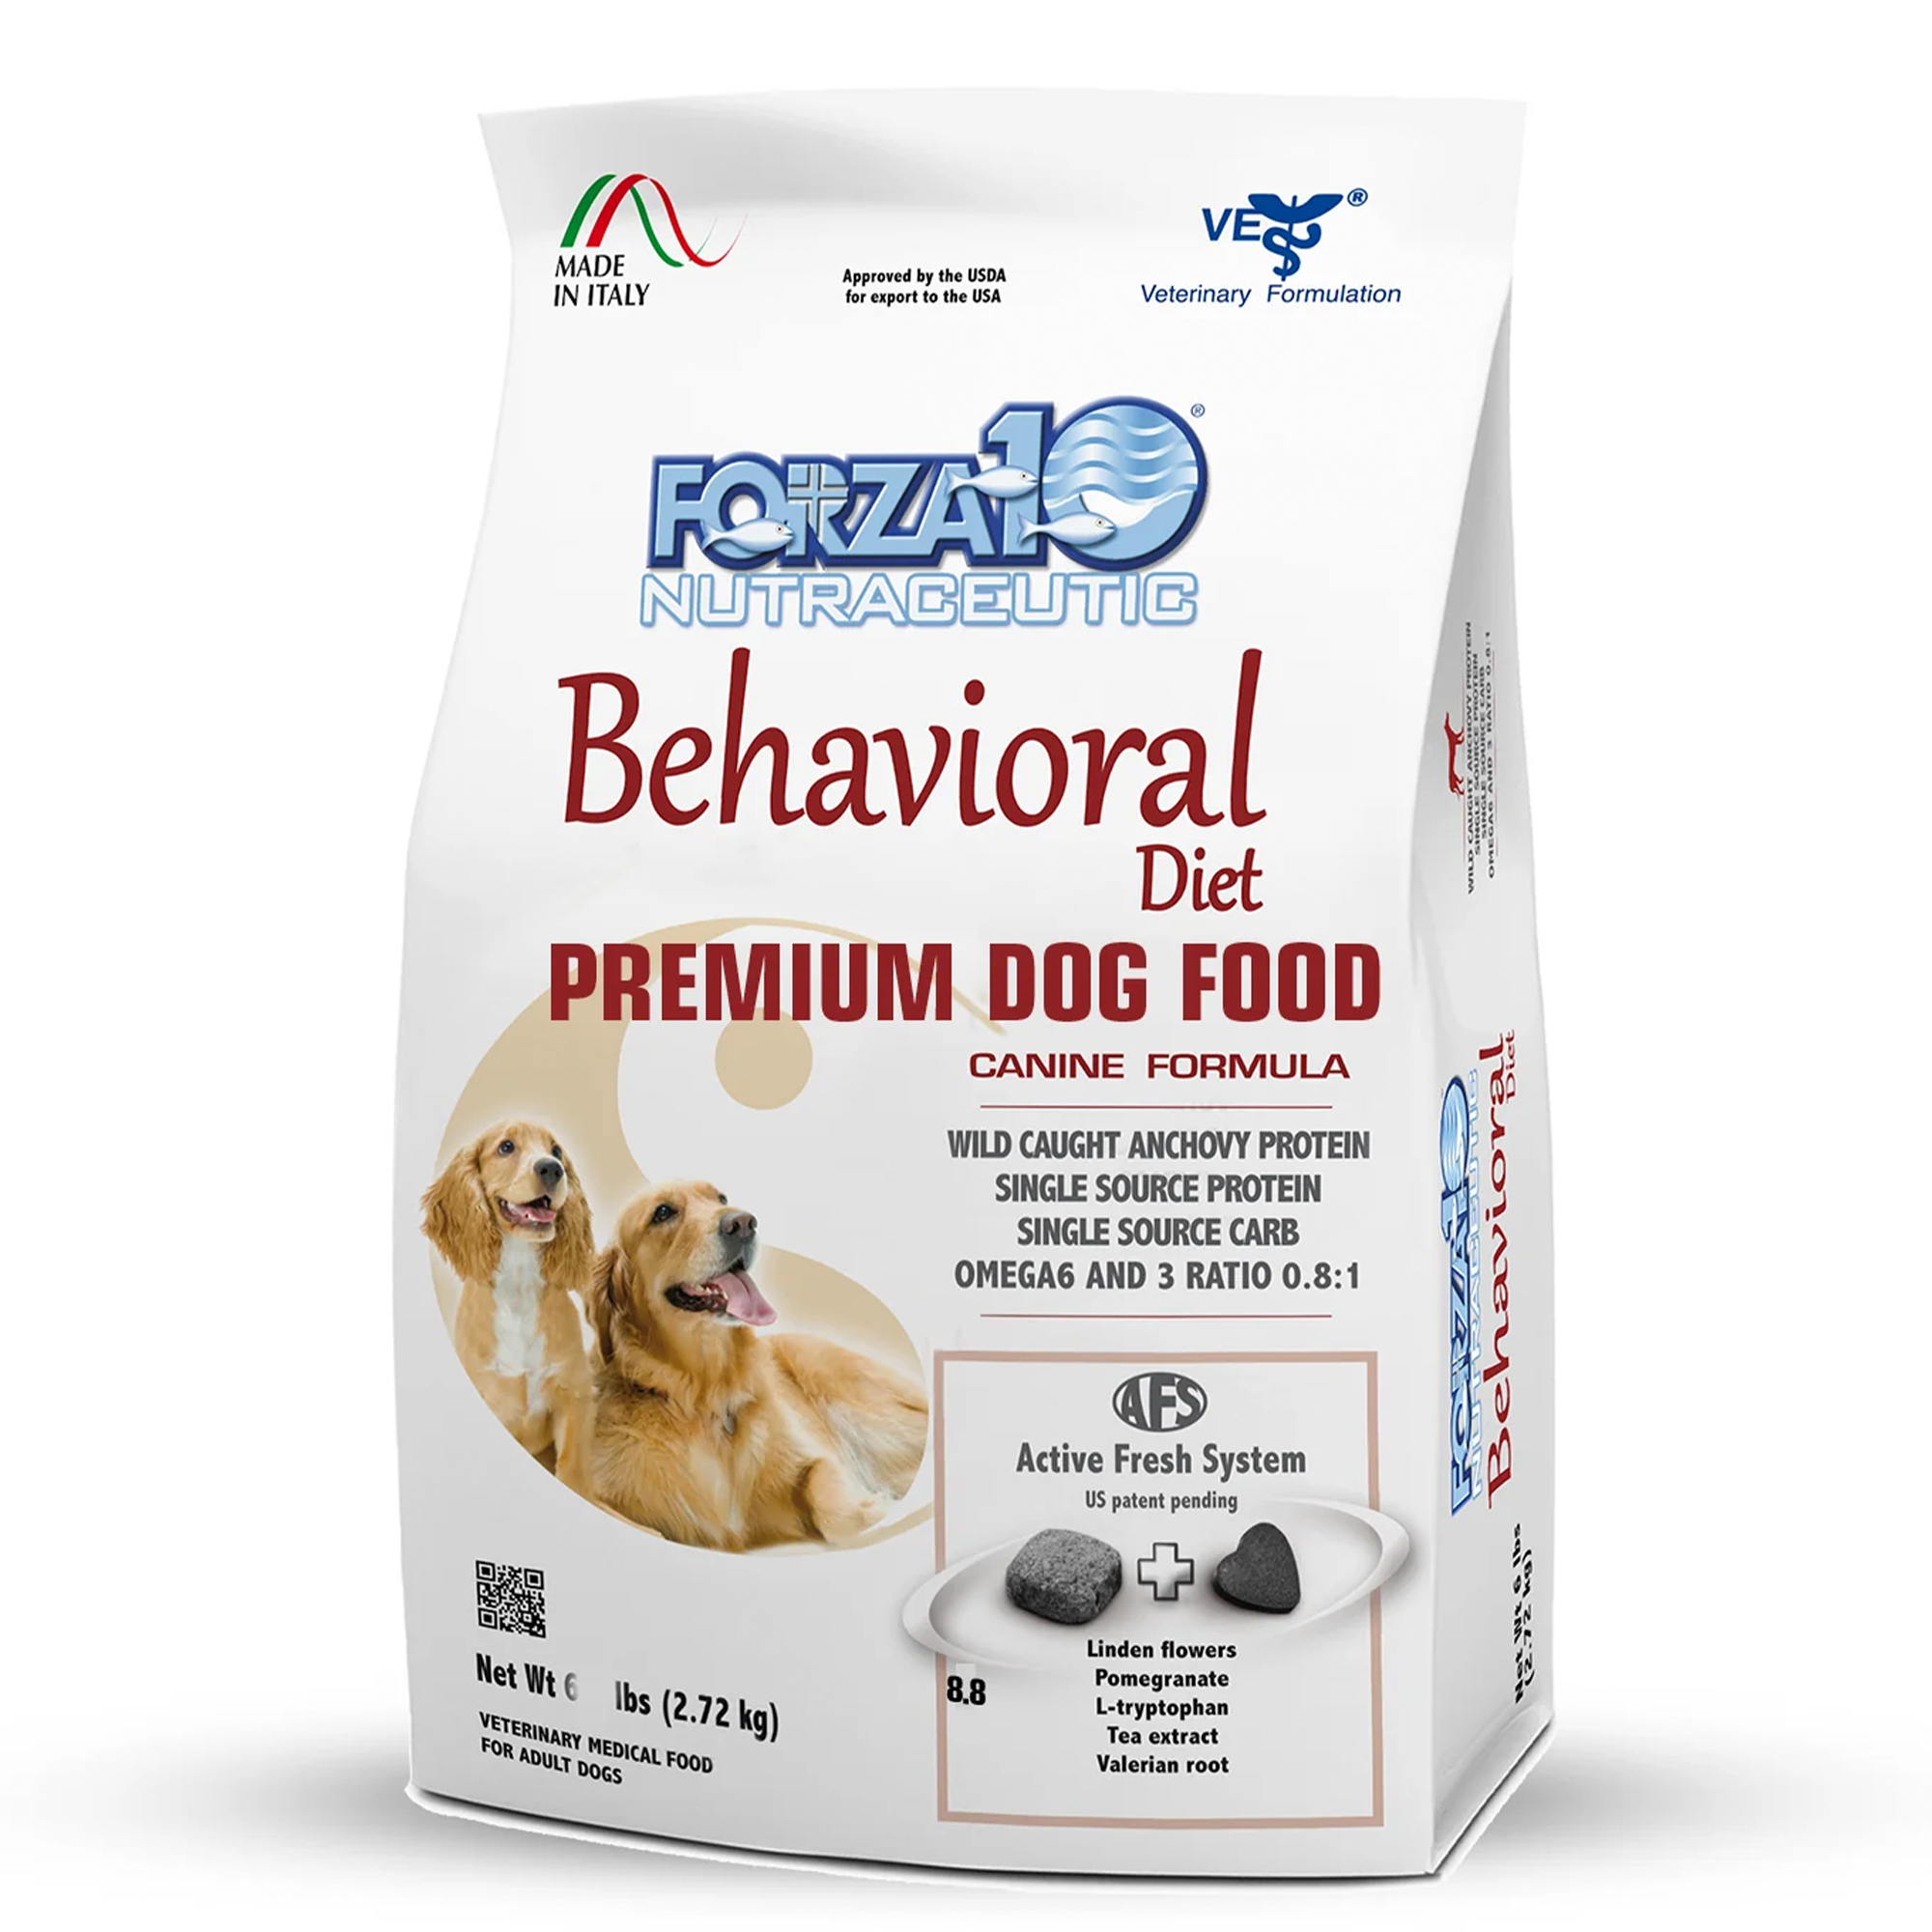 Forza10 Nutraceutic Active Behavioral Support Diet Dry Dog Food Usage